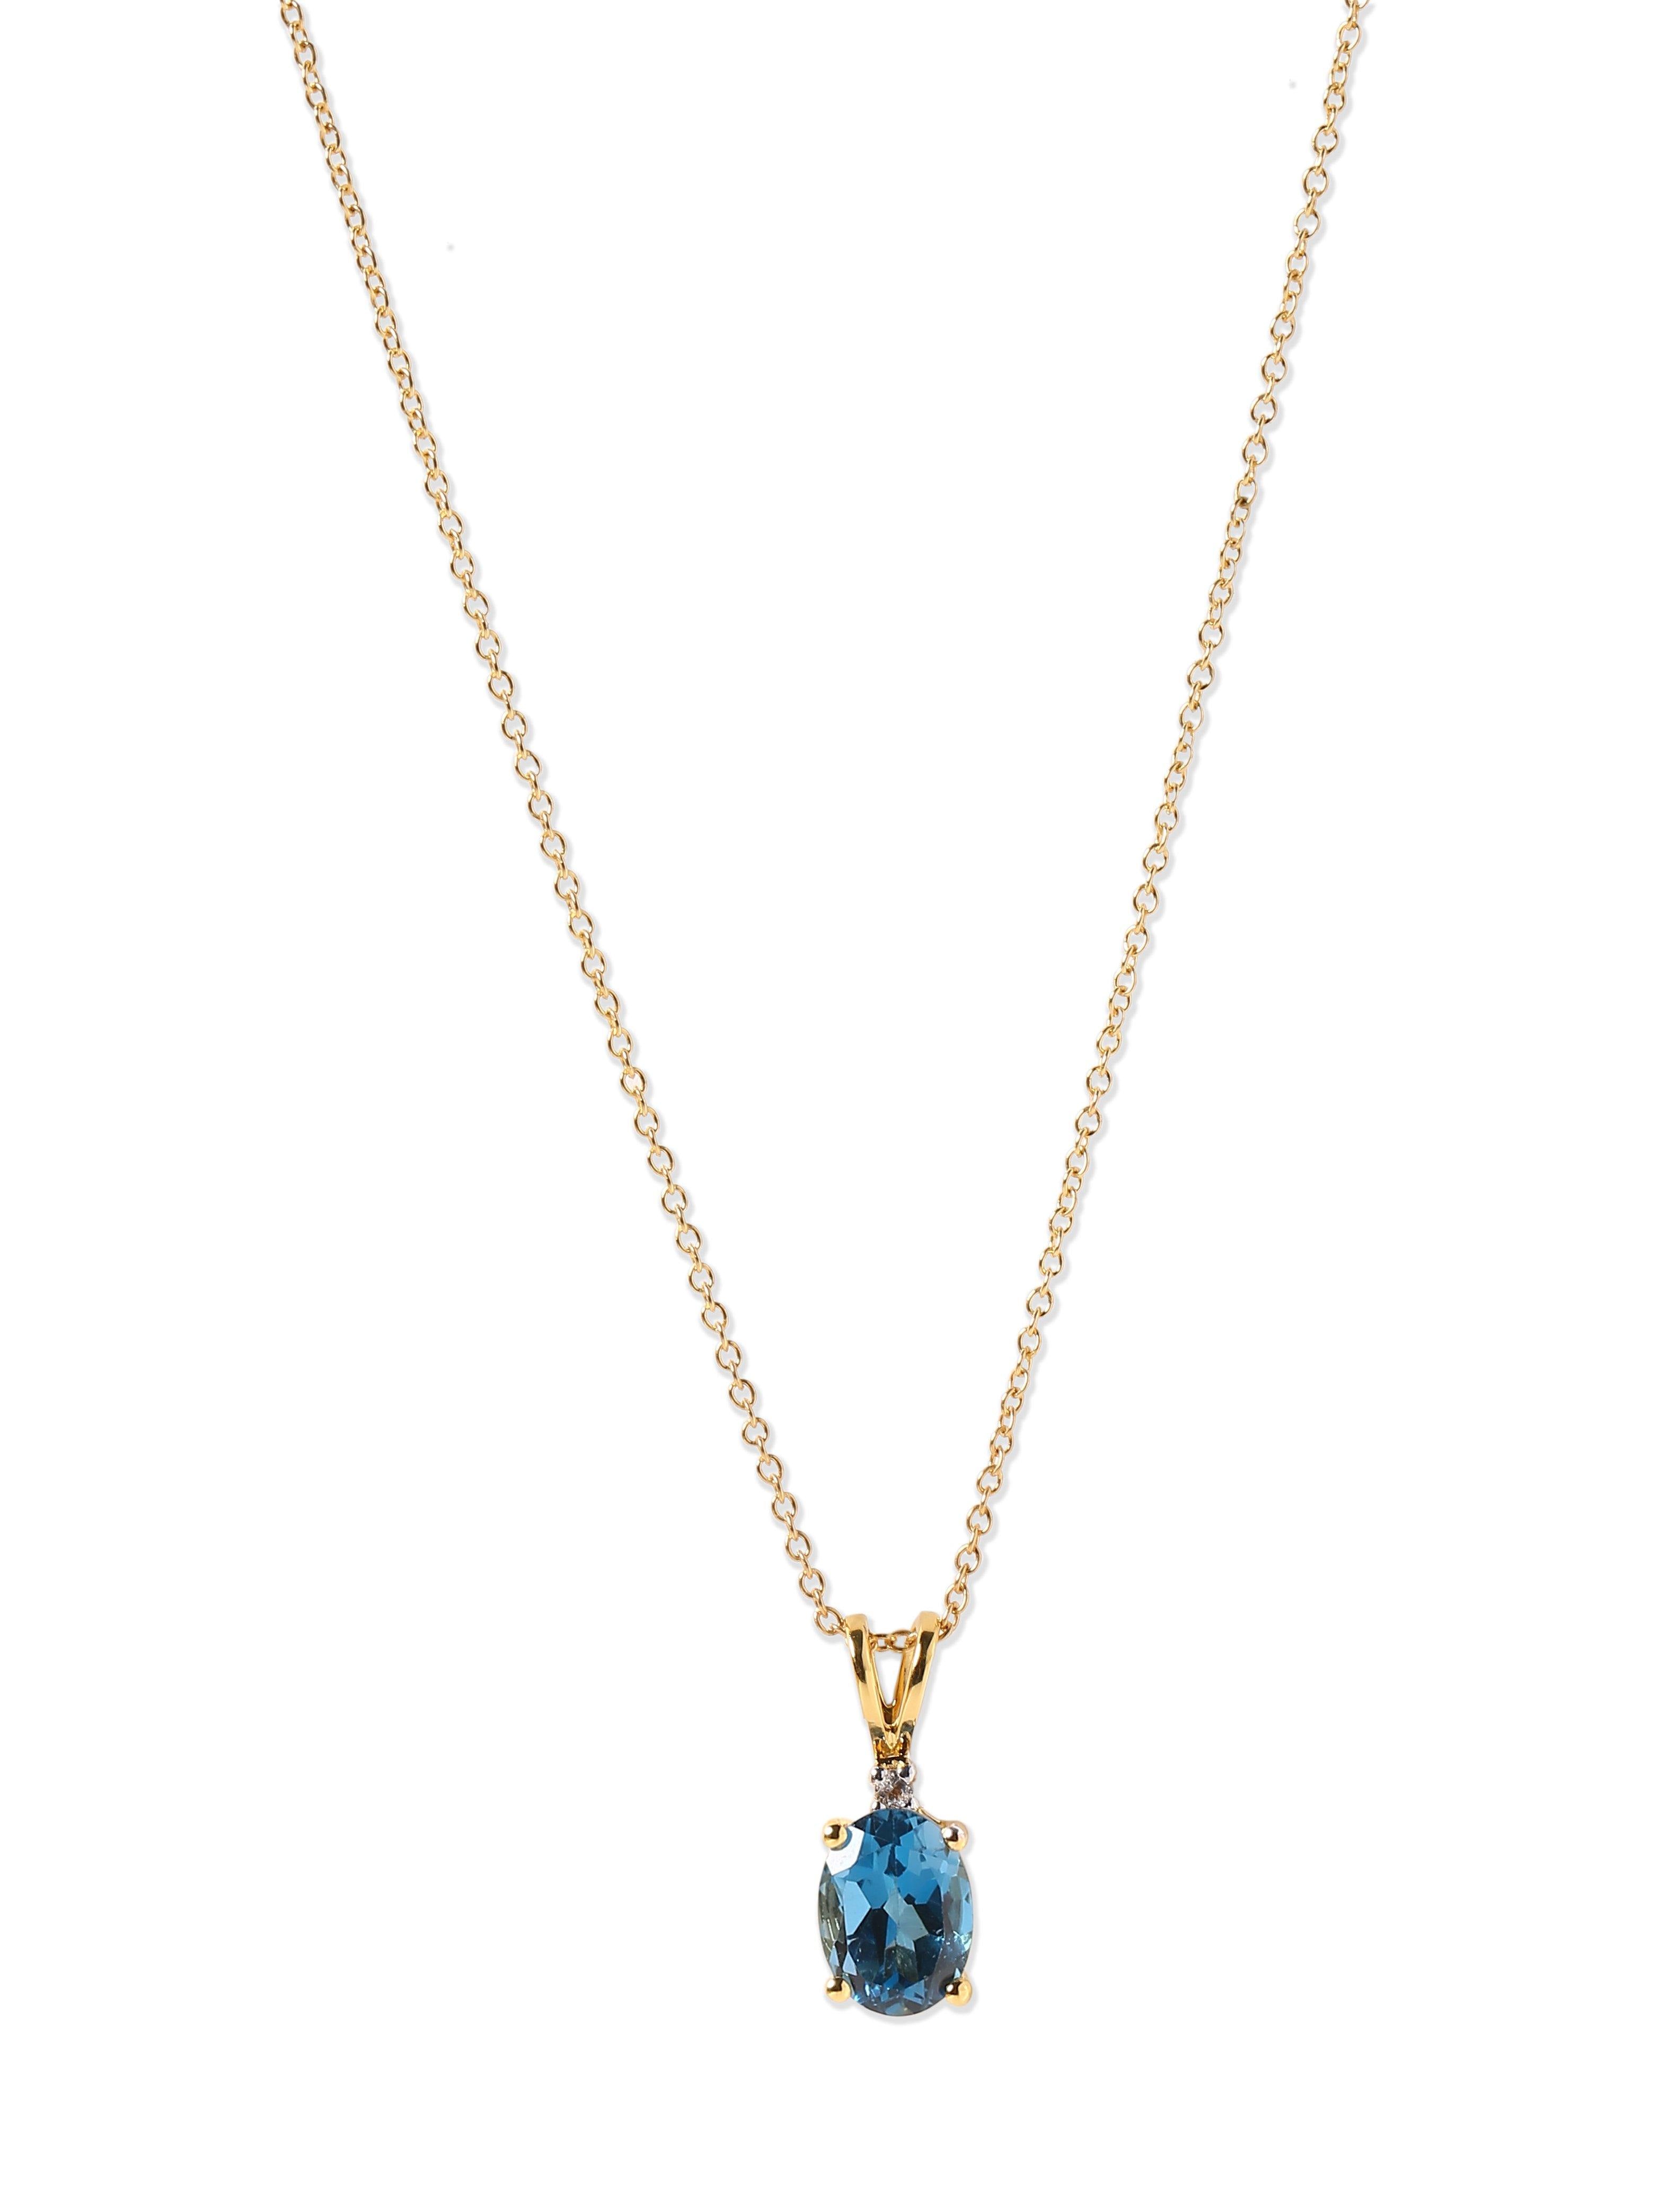 1.62 Ct. London Blue Topaz Solid 10k Yellow Gold Chain Pendant Necklace Jewelry - YoTreasure